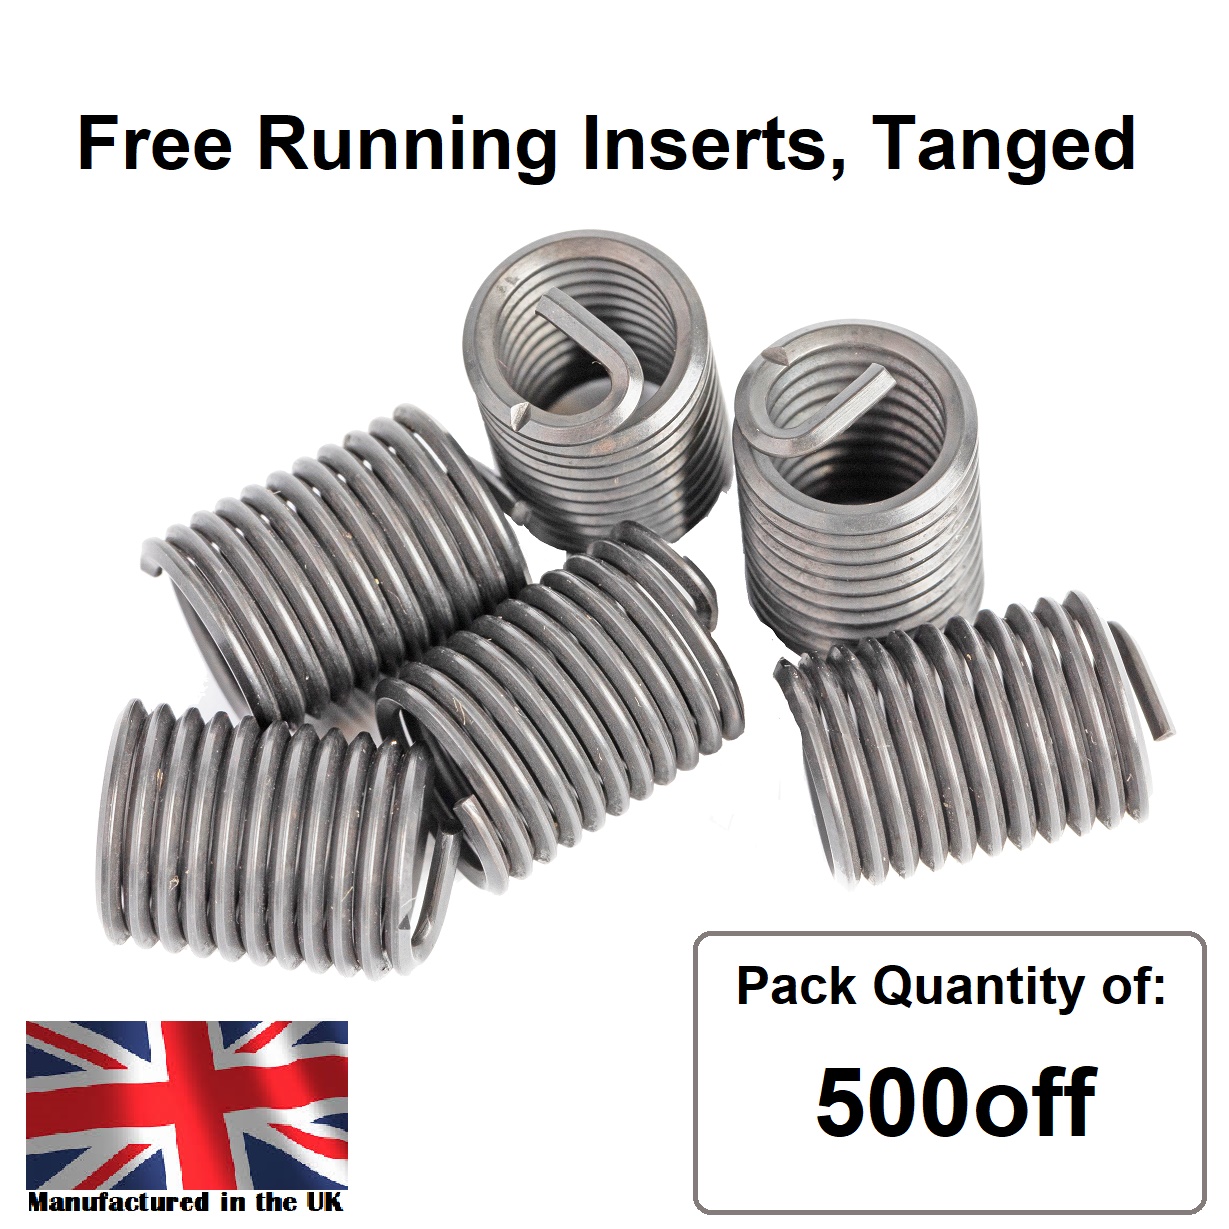 M2.5 x 0.45 x 1D Metric Coarse, Free Running, Tanged, Wire Thread Repair Insert, 304/A2 Stainless (Pack 500)